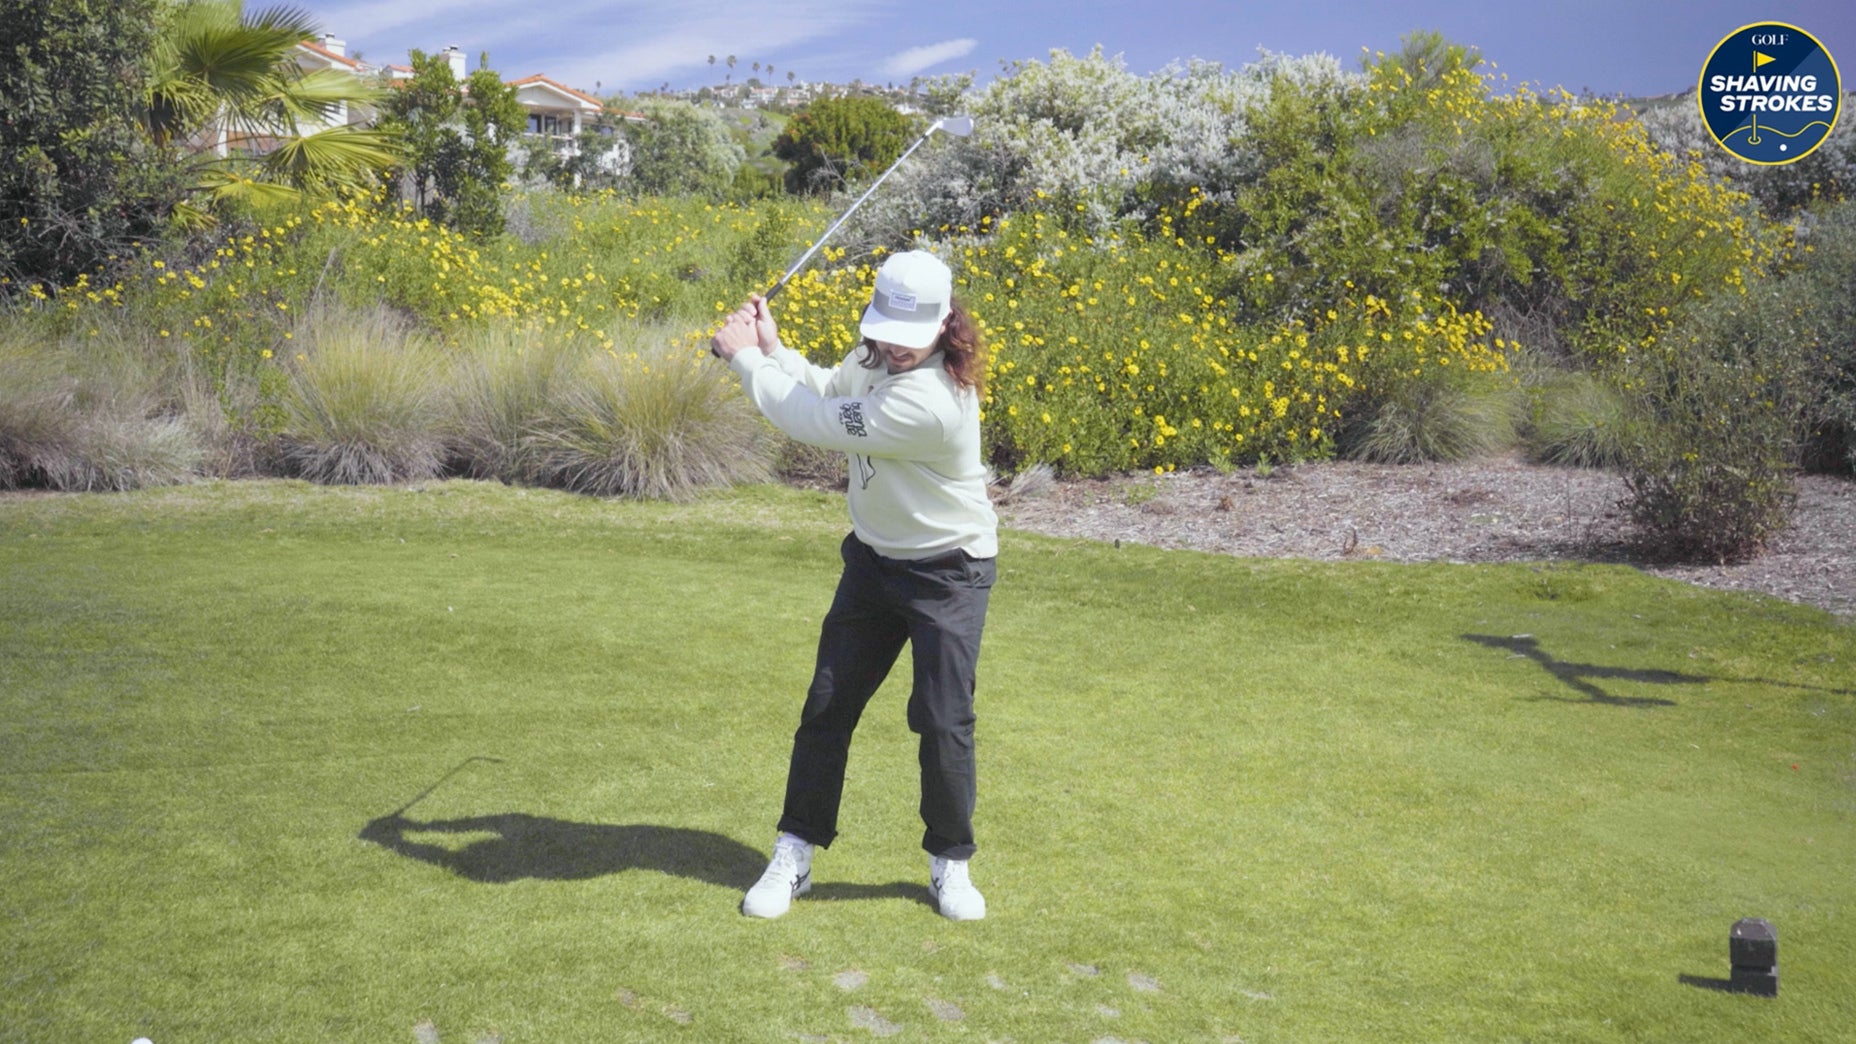 Can't stop chunking golf shots? Cleveland Golf ambassador Jake Hutt gives a quick lesson to finally avoid them once and for all